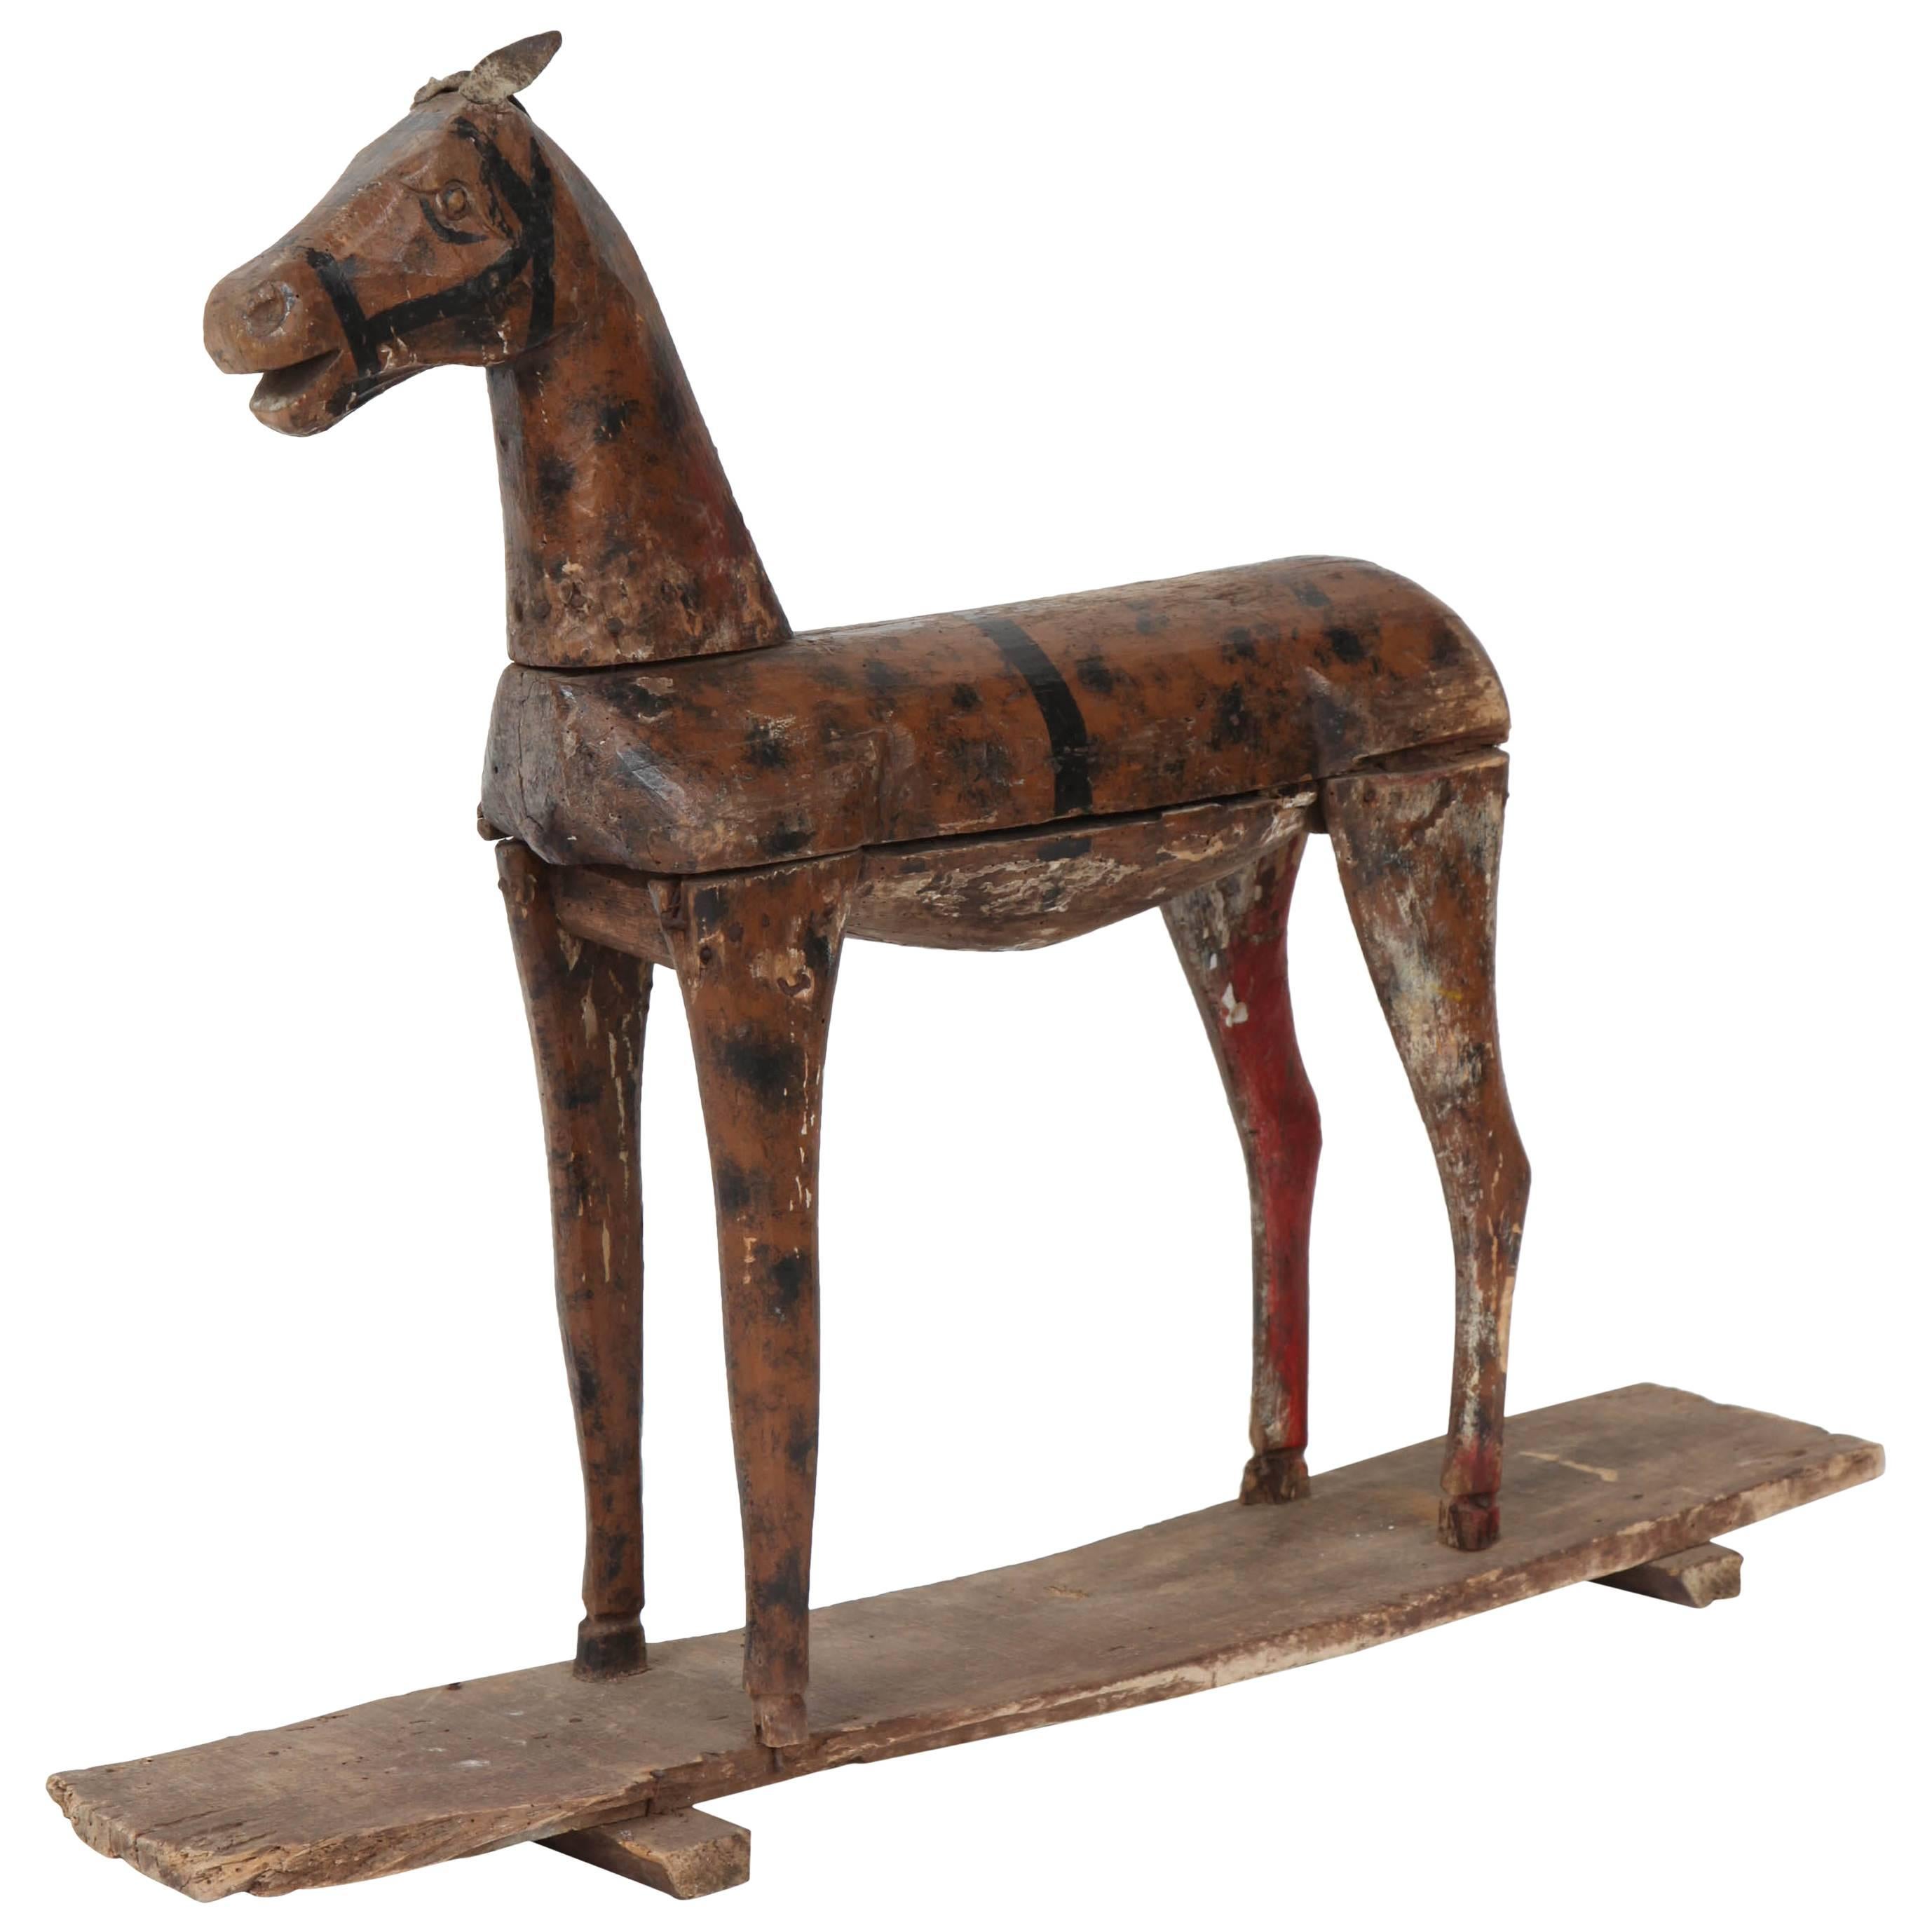 Carved Wooden and Painted Toy Horse